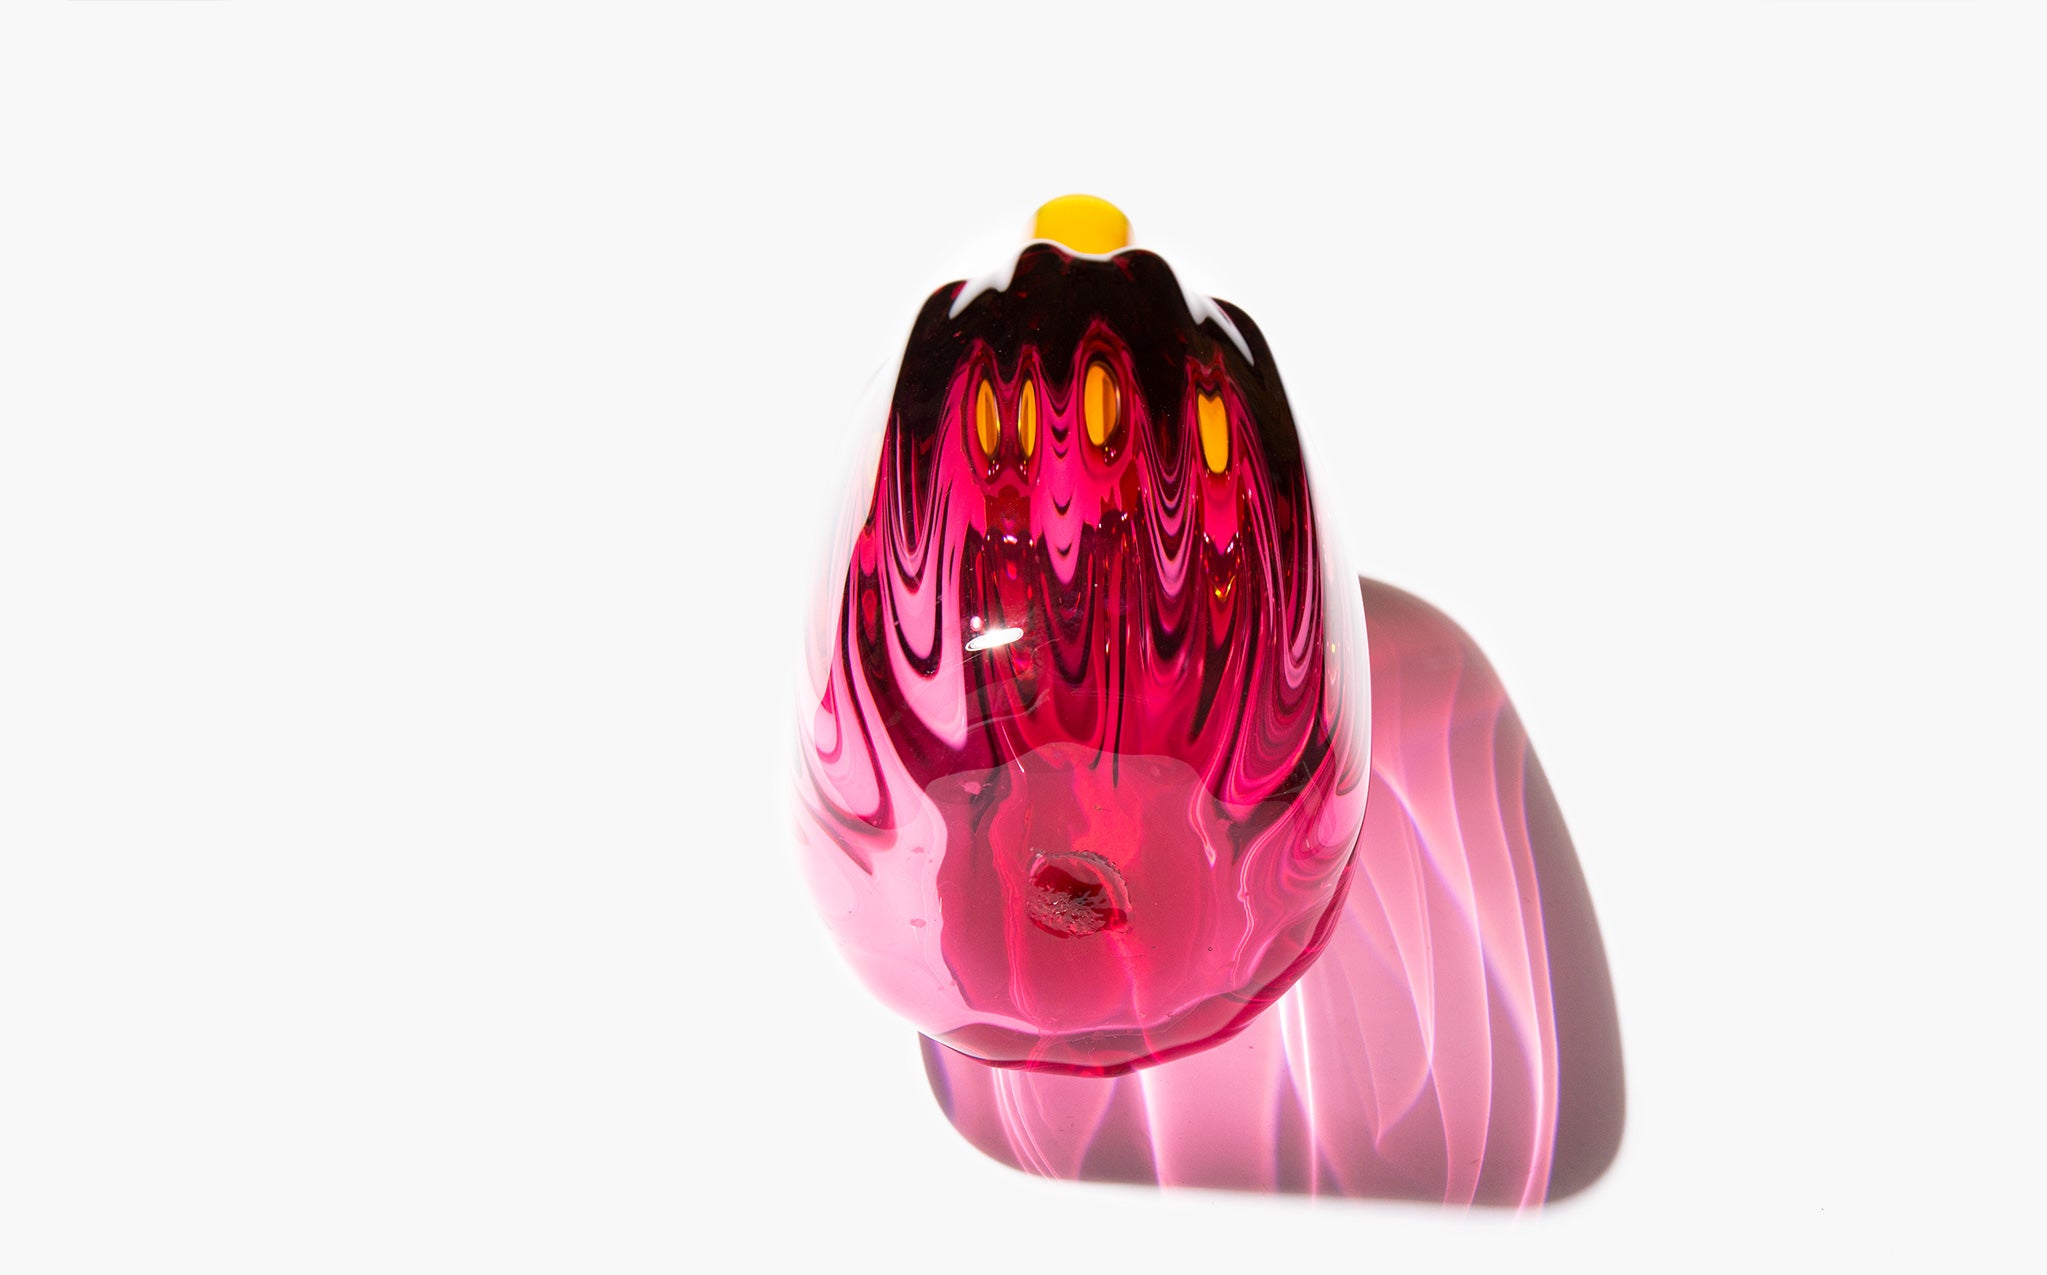 Fluted Pomegranate and Amber Vase